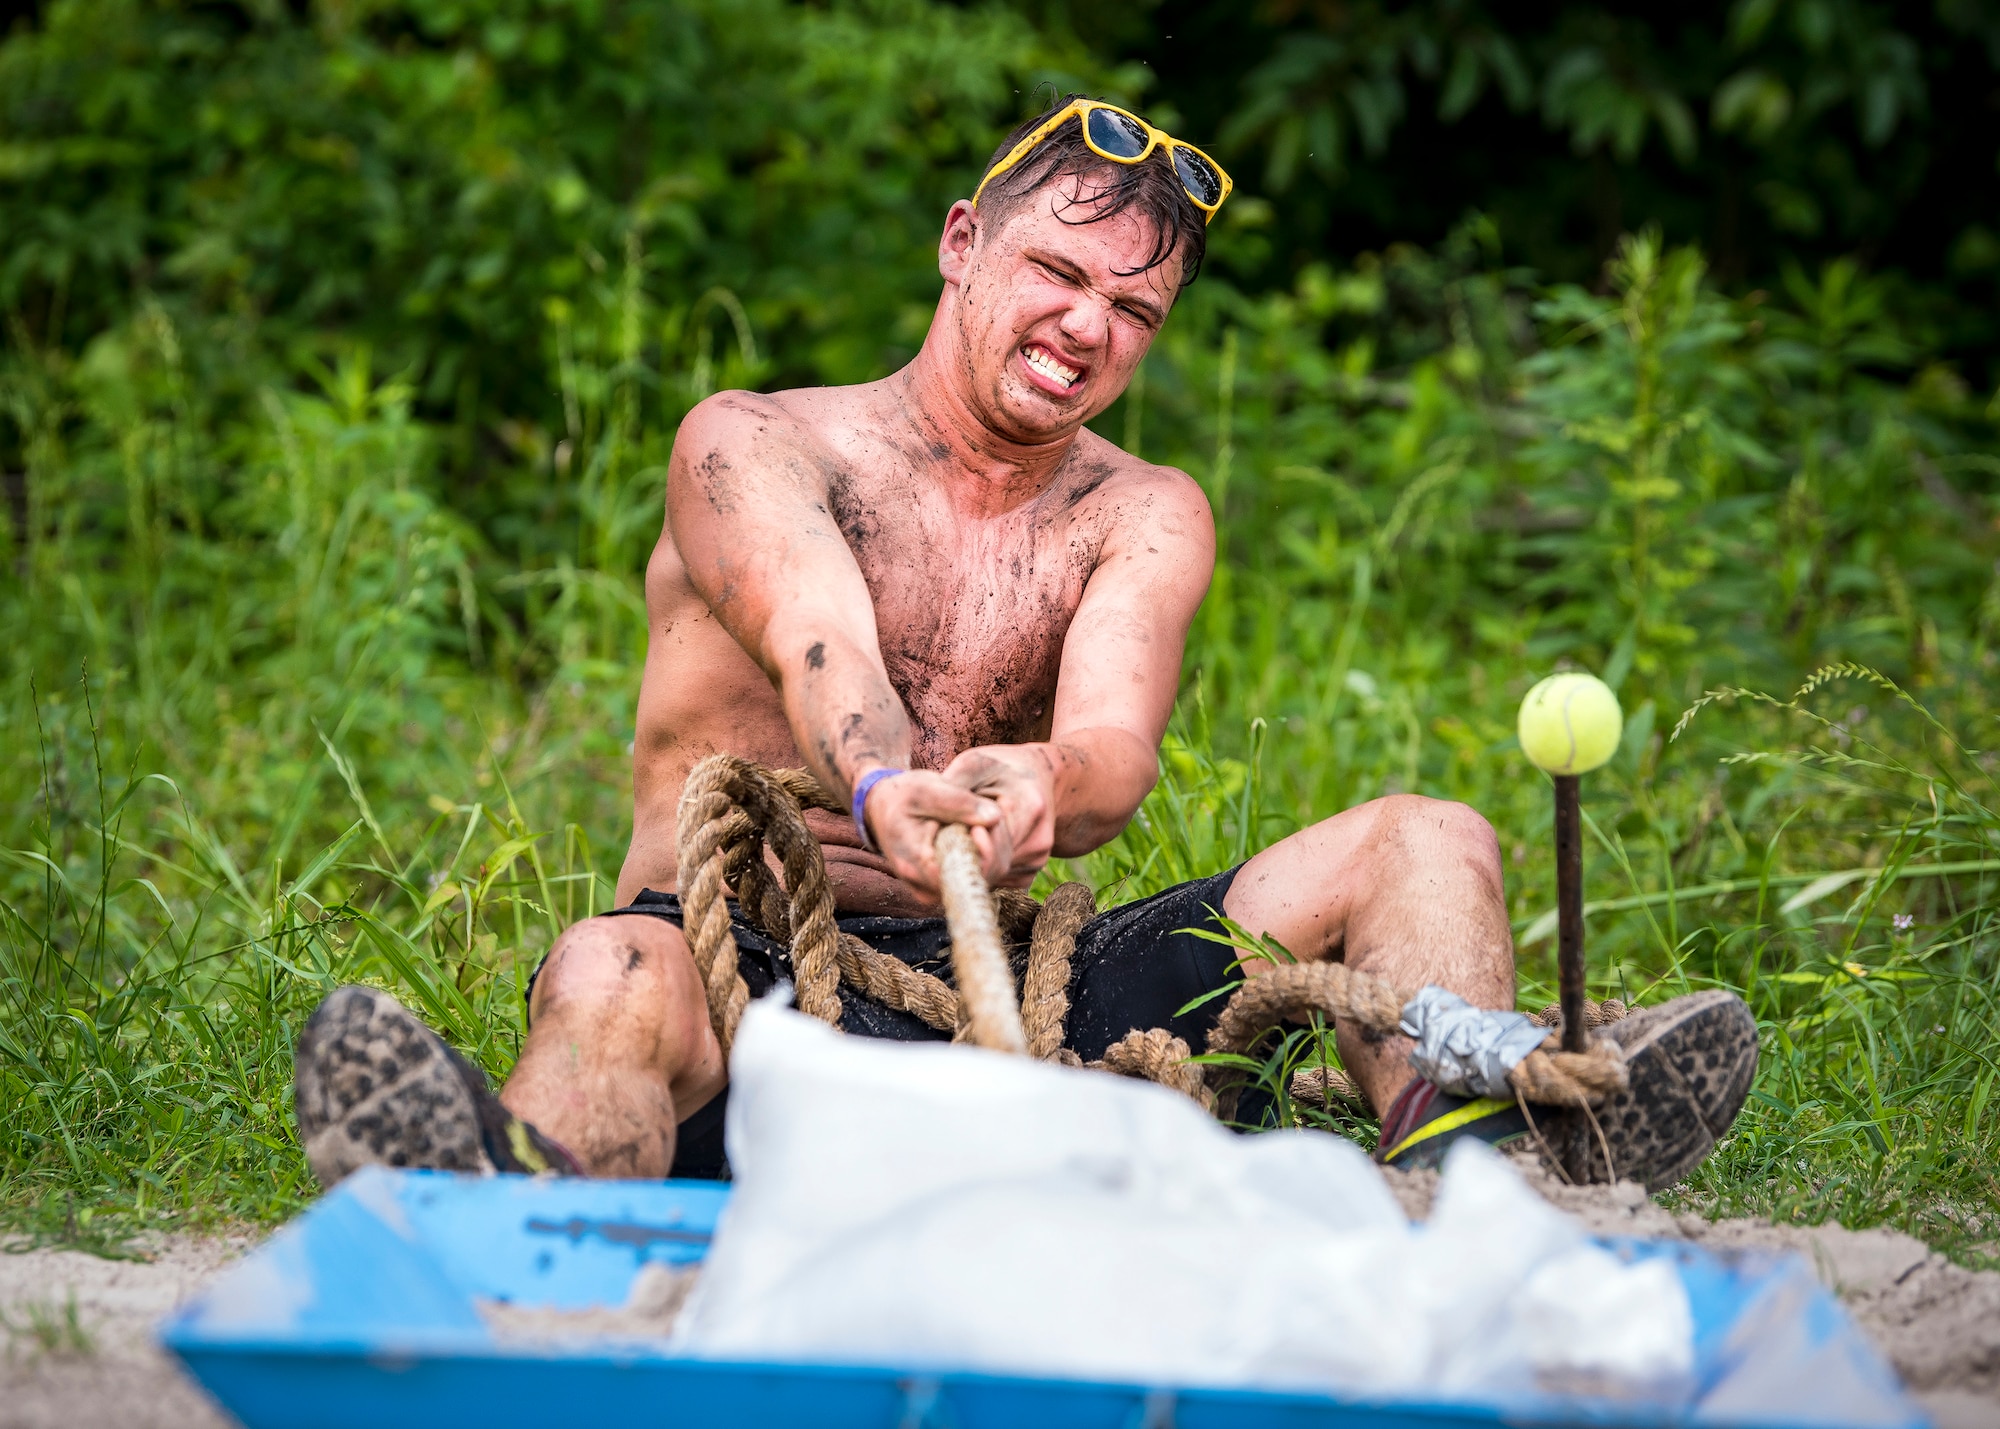 A Moody Mud Run participant pulls a weighted sled, May 4, 2019, in Ray City, Ga.The sixth annual Mud Run had approximately 850 participants who had to overcome a series of obstacles on the 4 and 5-mile courses. The 32-obstacle course gave Airmen, families and the local community an opportunity to build camaraderie and teamwork skills. (U.S. Air Force photo by Airman 1st Class Eugene Oliver)